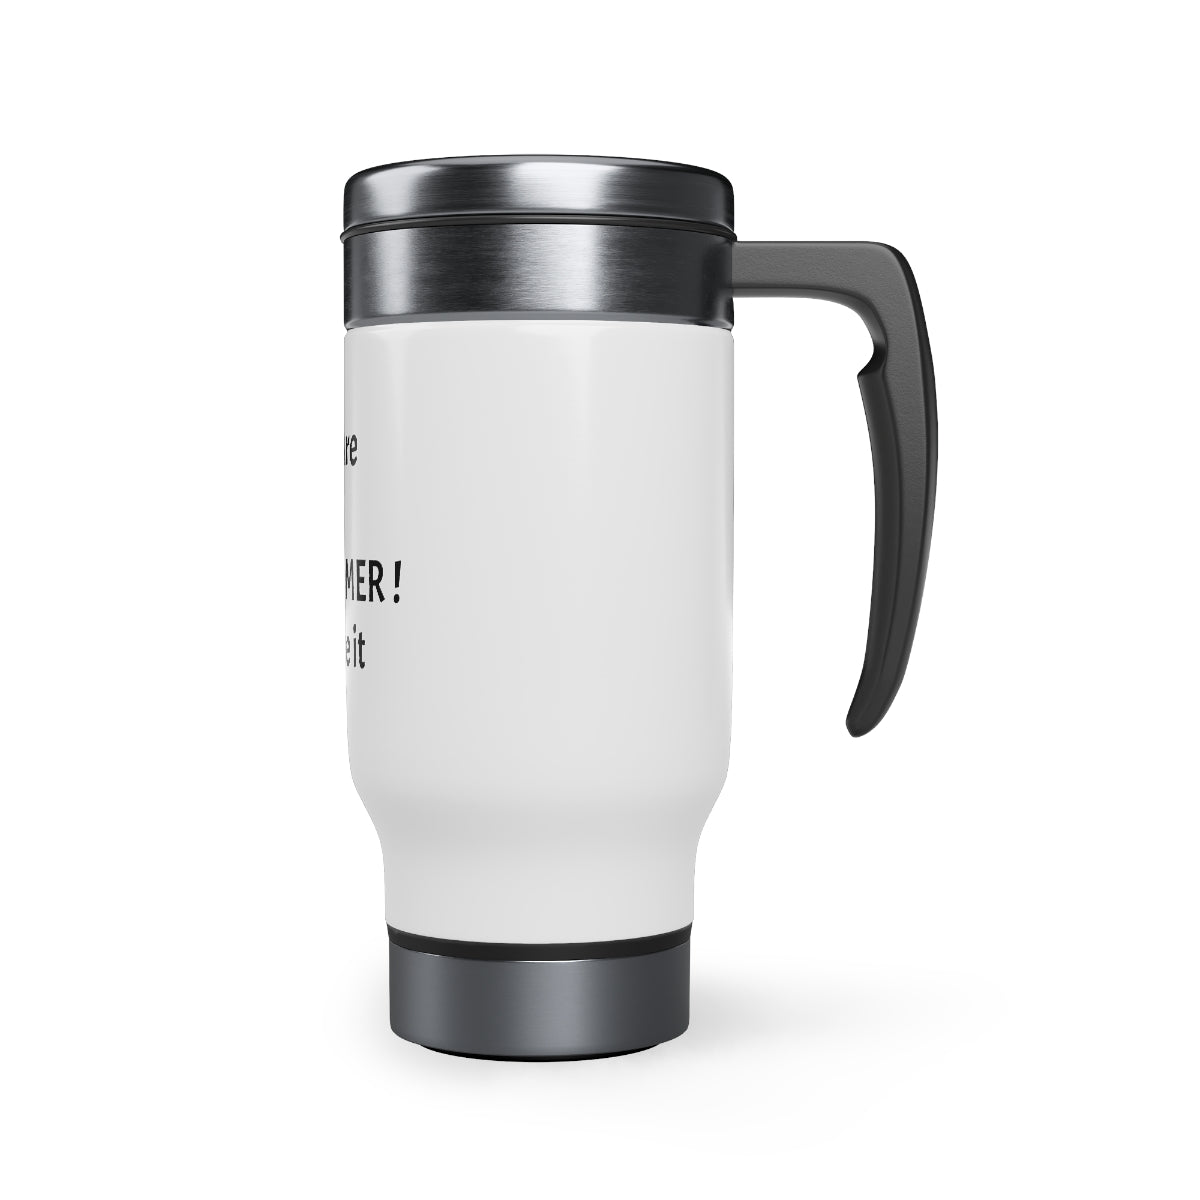 You Are an Overcomer! Stainless Steel Travel Mug with Handle, 14oz